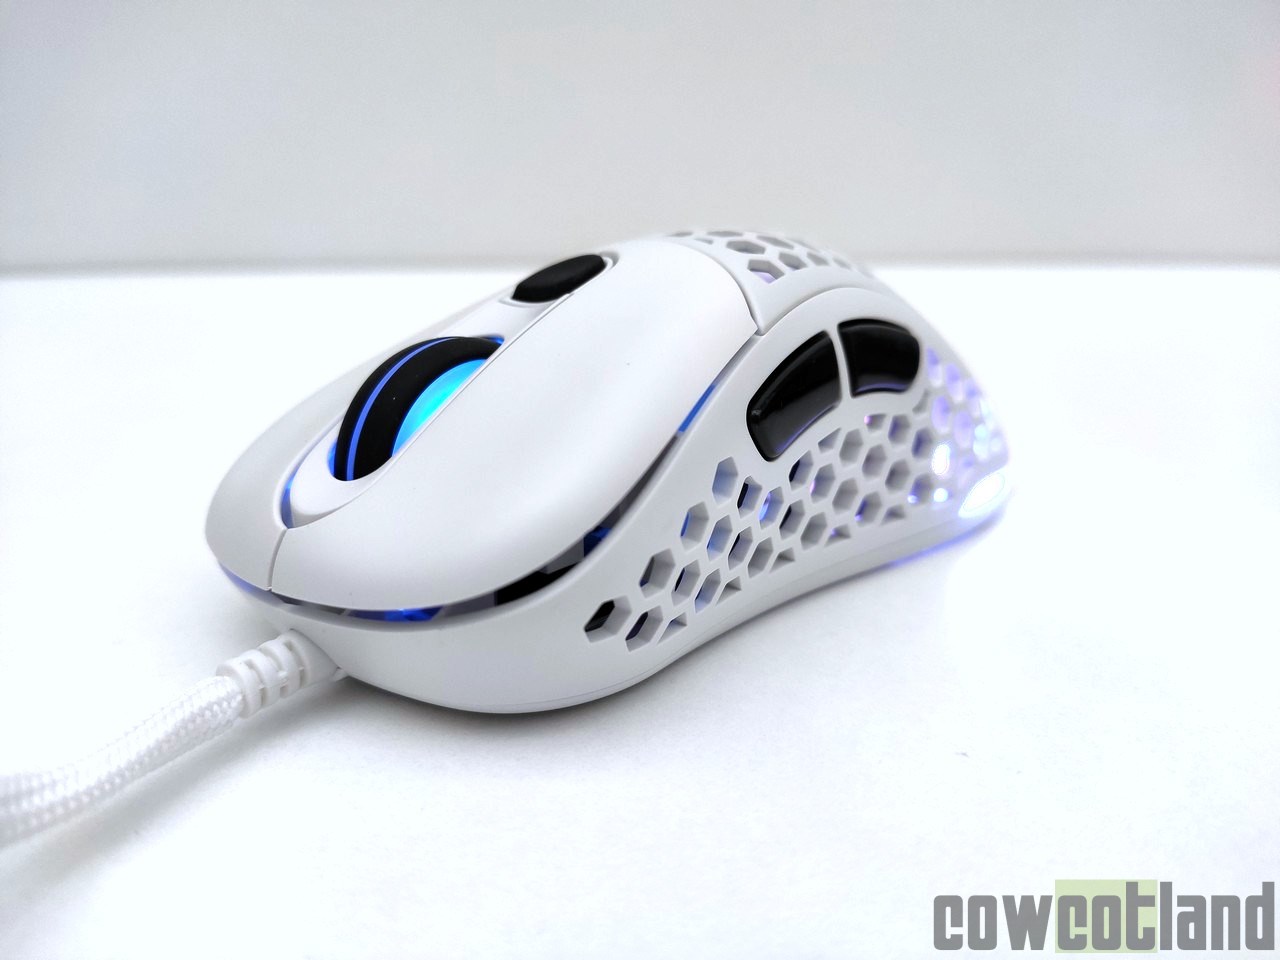 Image 43514, galerie Test souris Gaming Sharkoon Light 200 : Zowie-Killer ?